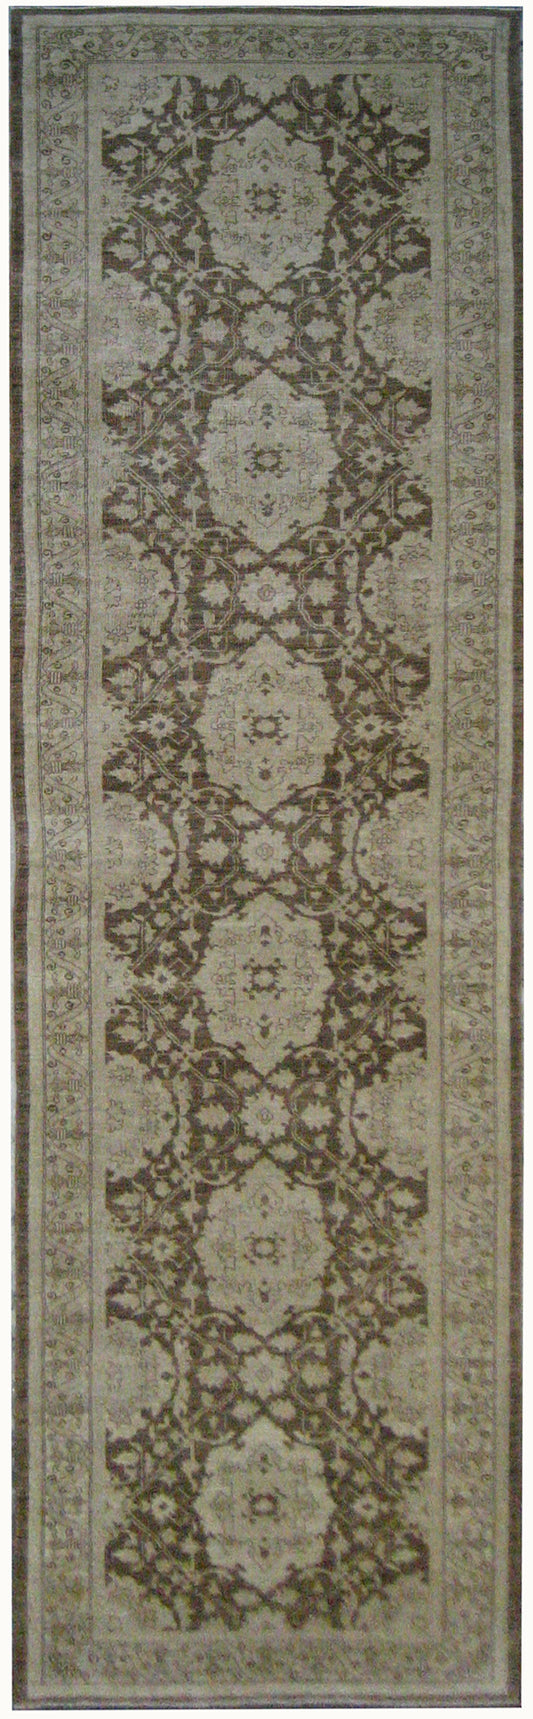 4x14 Brown Agra 505 Ariana Traditional Runner Rug